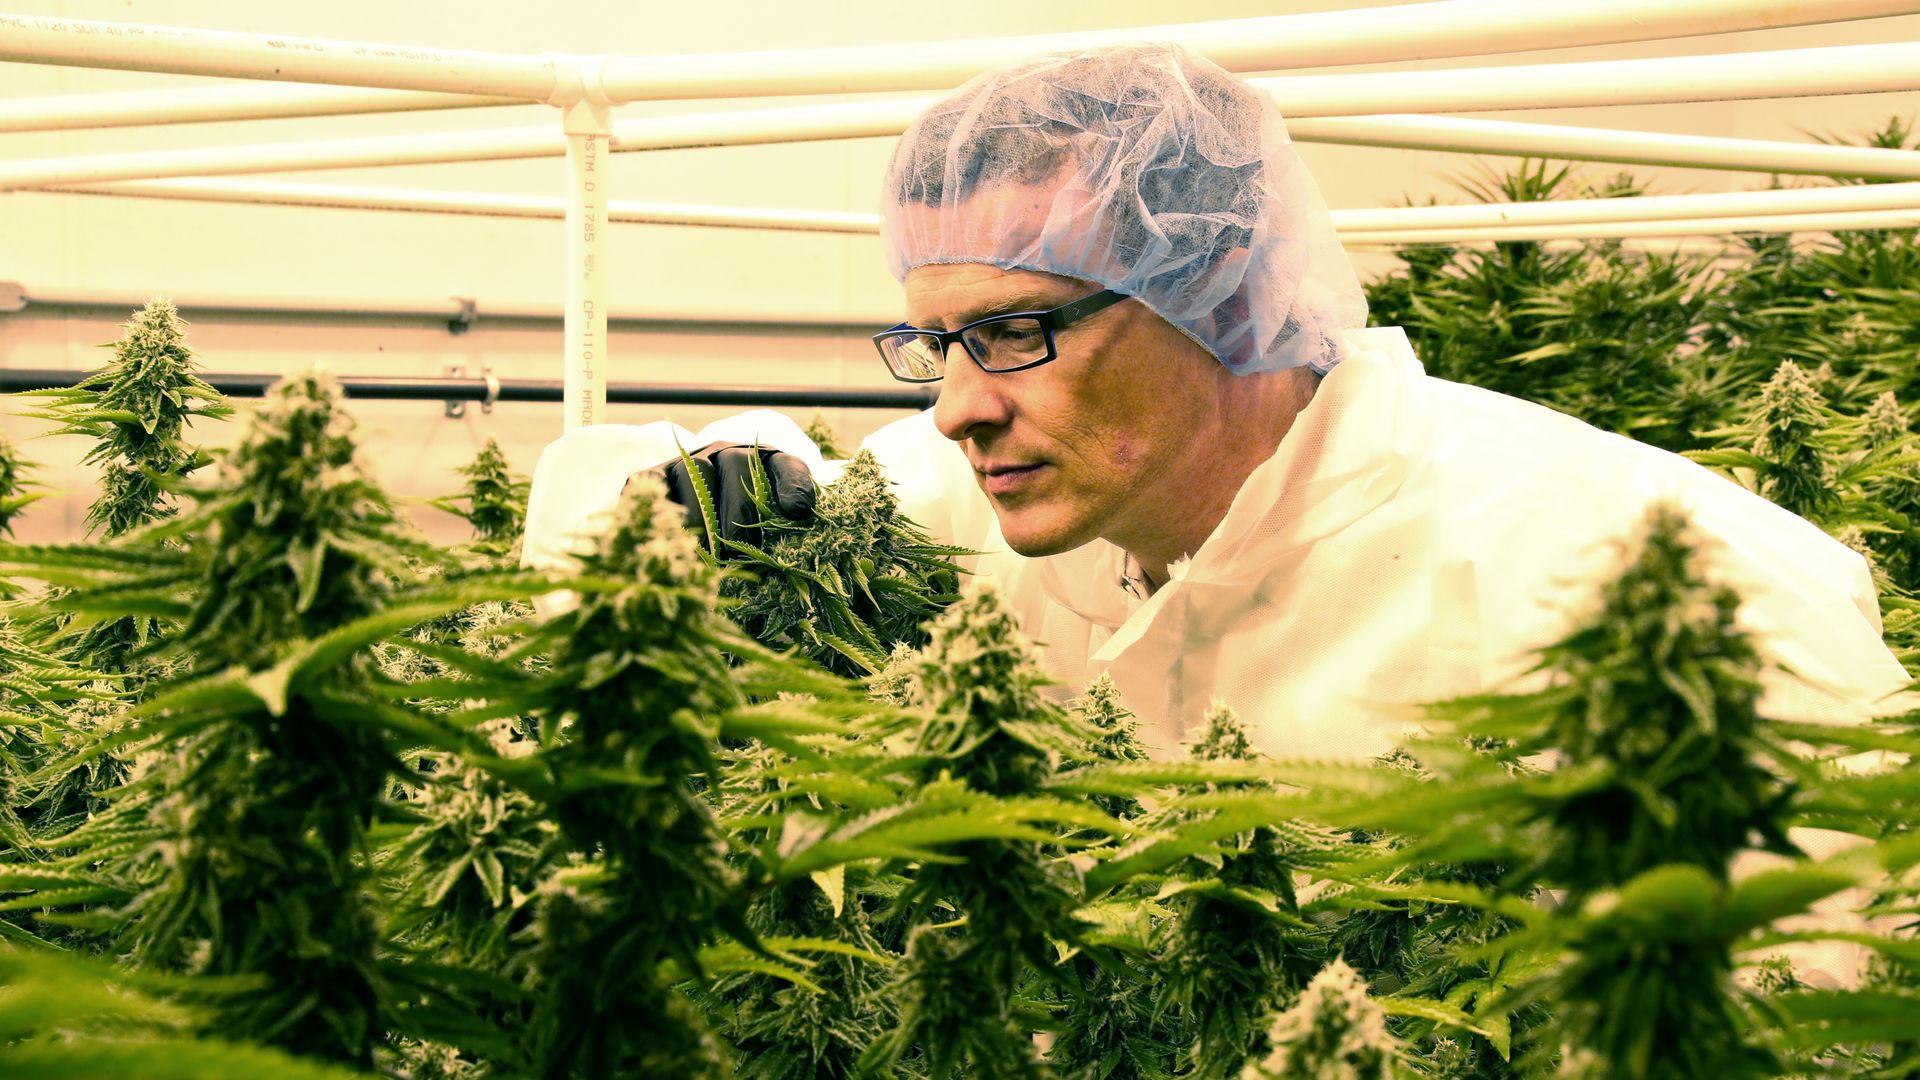  Mike Dundas, CEO of Sira Naturals, looks over plants at the company's facility in Milford, MA 